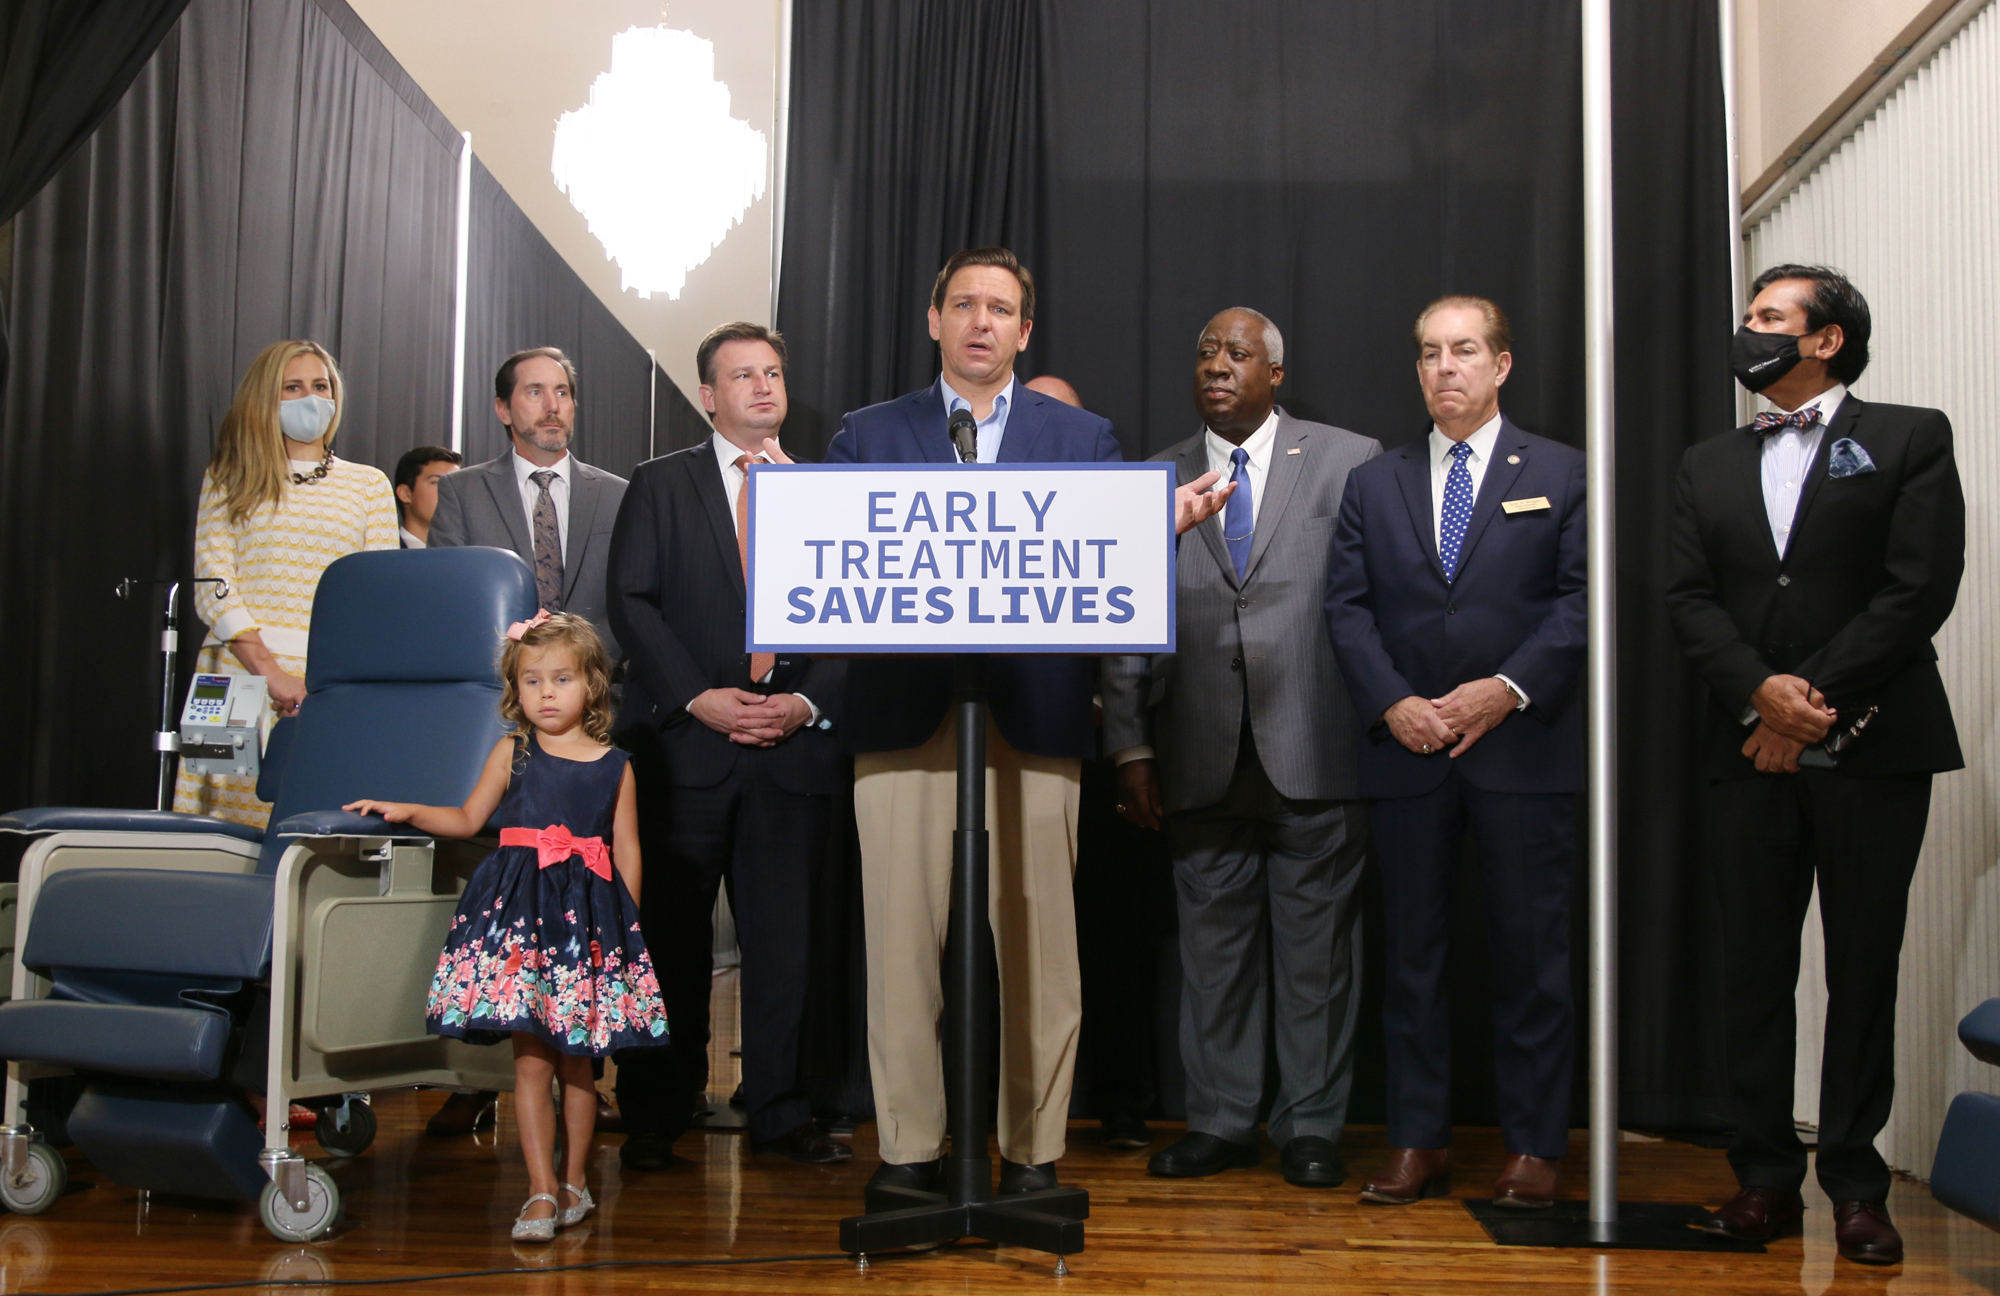 Gov. Ron DeSantis said he was confident that monoclonal antibody therapy treatment will help reduce the number of hospitalizations due to COVID-19. Photo by Jarleene Almenas